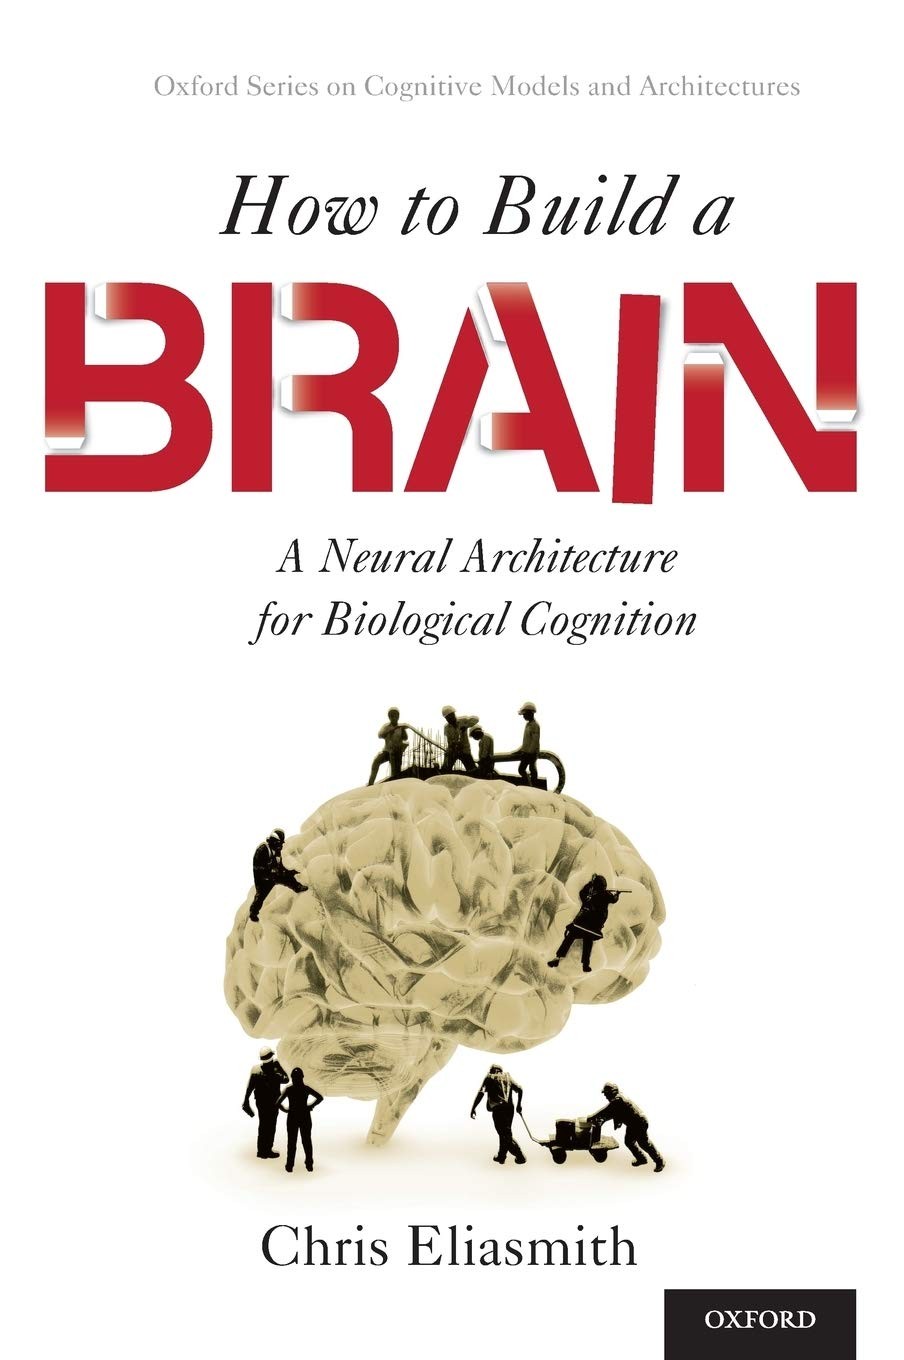 How to Build a Brain: A Neural Architecture for Biological Cognition